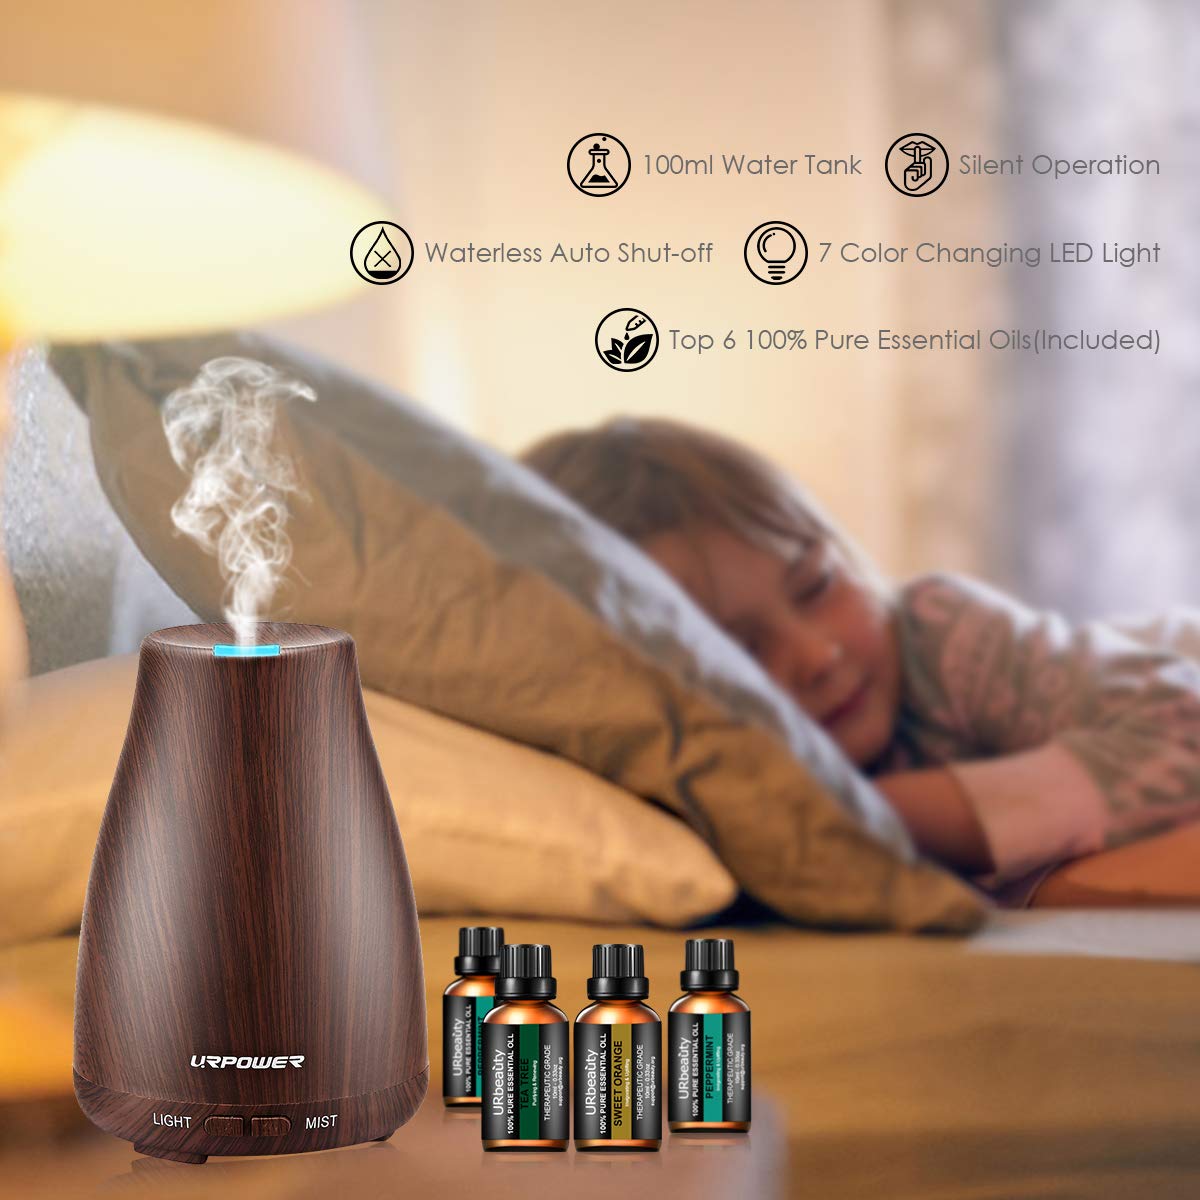 URPOWER Classical Essential Oil Diffuser with 6 Bottles 100% Pure Essential Oils, Gift Set Aroma Cool Mist Humidifier Aromatherapy Oil Diffuser Essential Oils for Home and Office